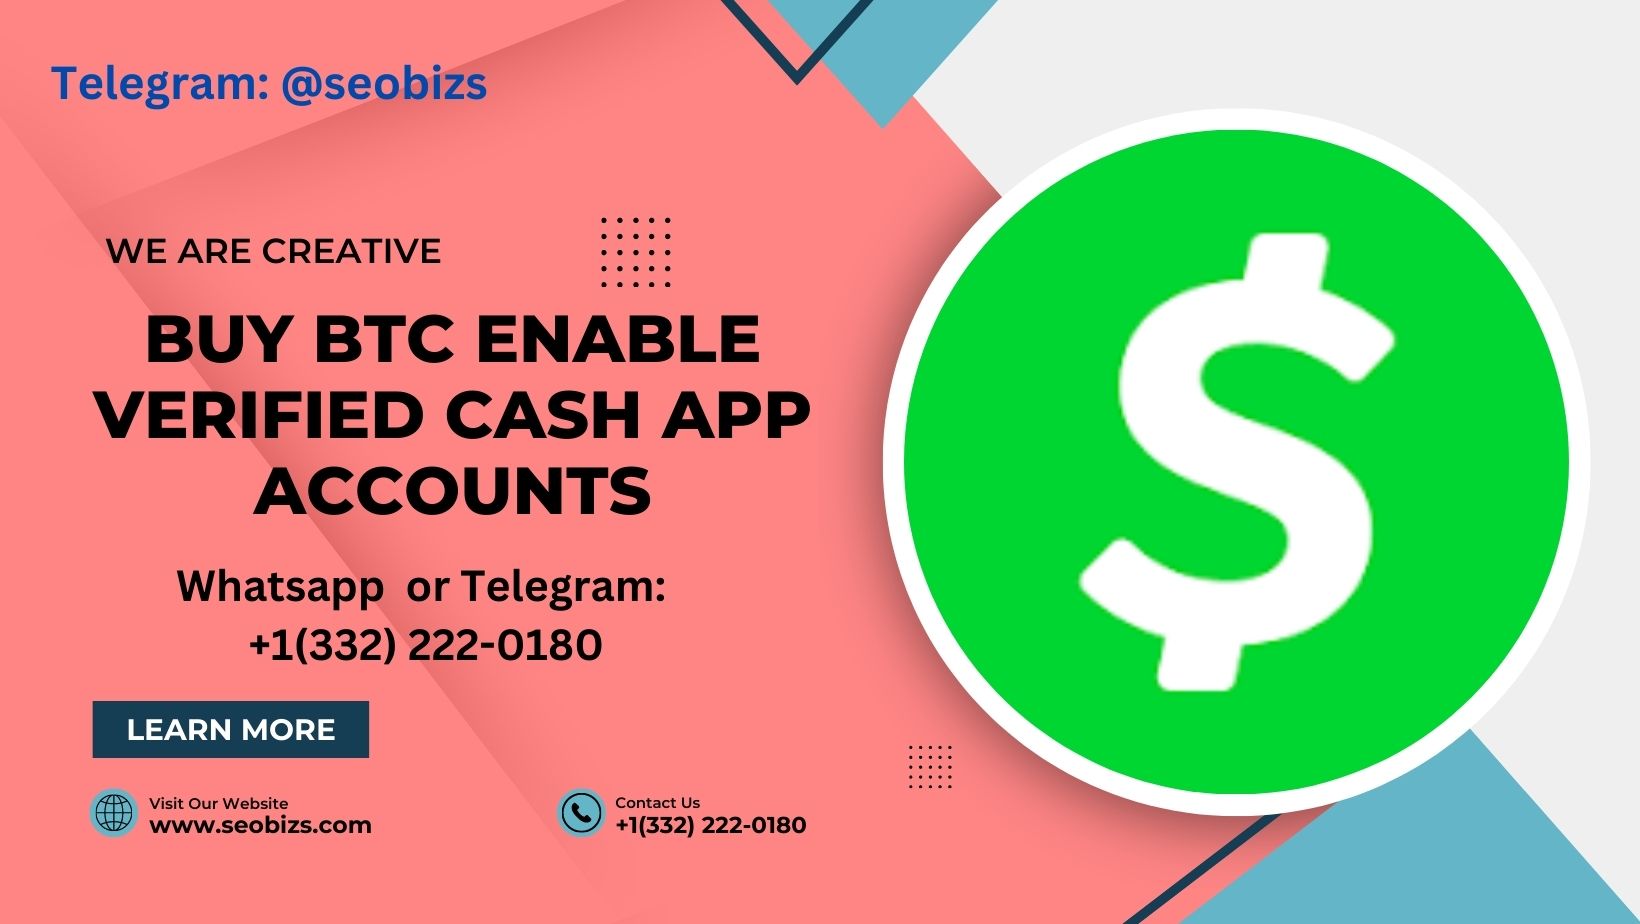 You can easily buy Bitcoins with a verified Cash App account or Wire transfer. Buying Bitcoins takes only a few steps and you can start using your verified cash app account within minutes.